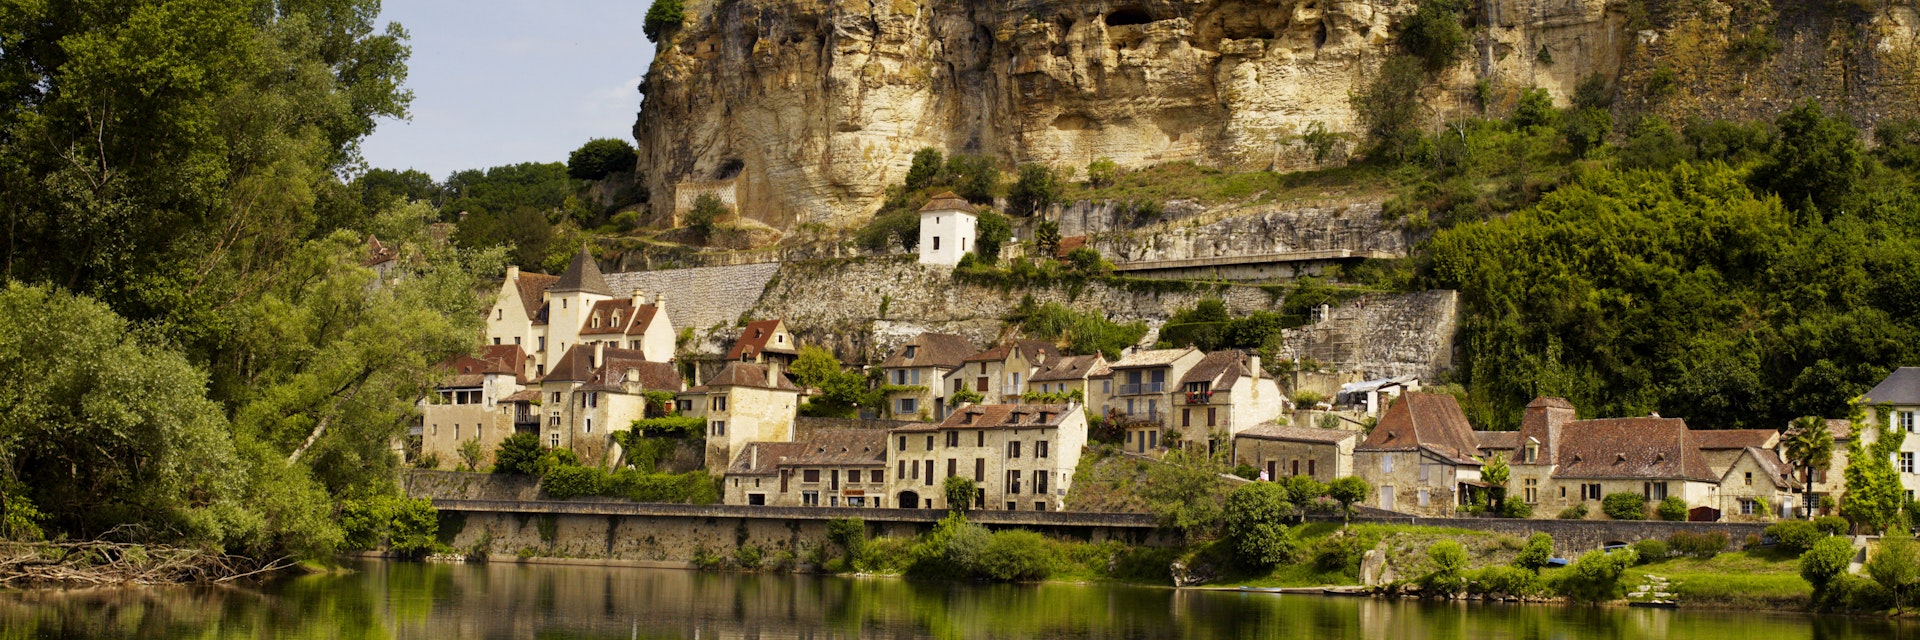 Château de Beynac perched atop a limestone cliff above the village of Beynac-et-Cazenac, on the banks of the Dordogne River.
Lonely Planet Traveller Magazine